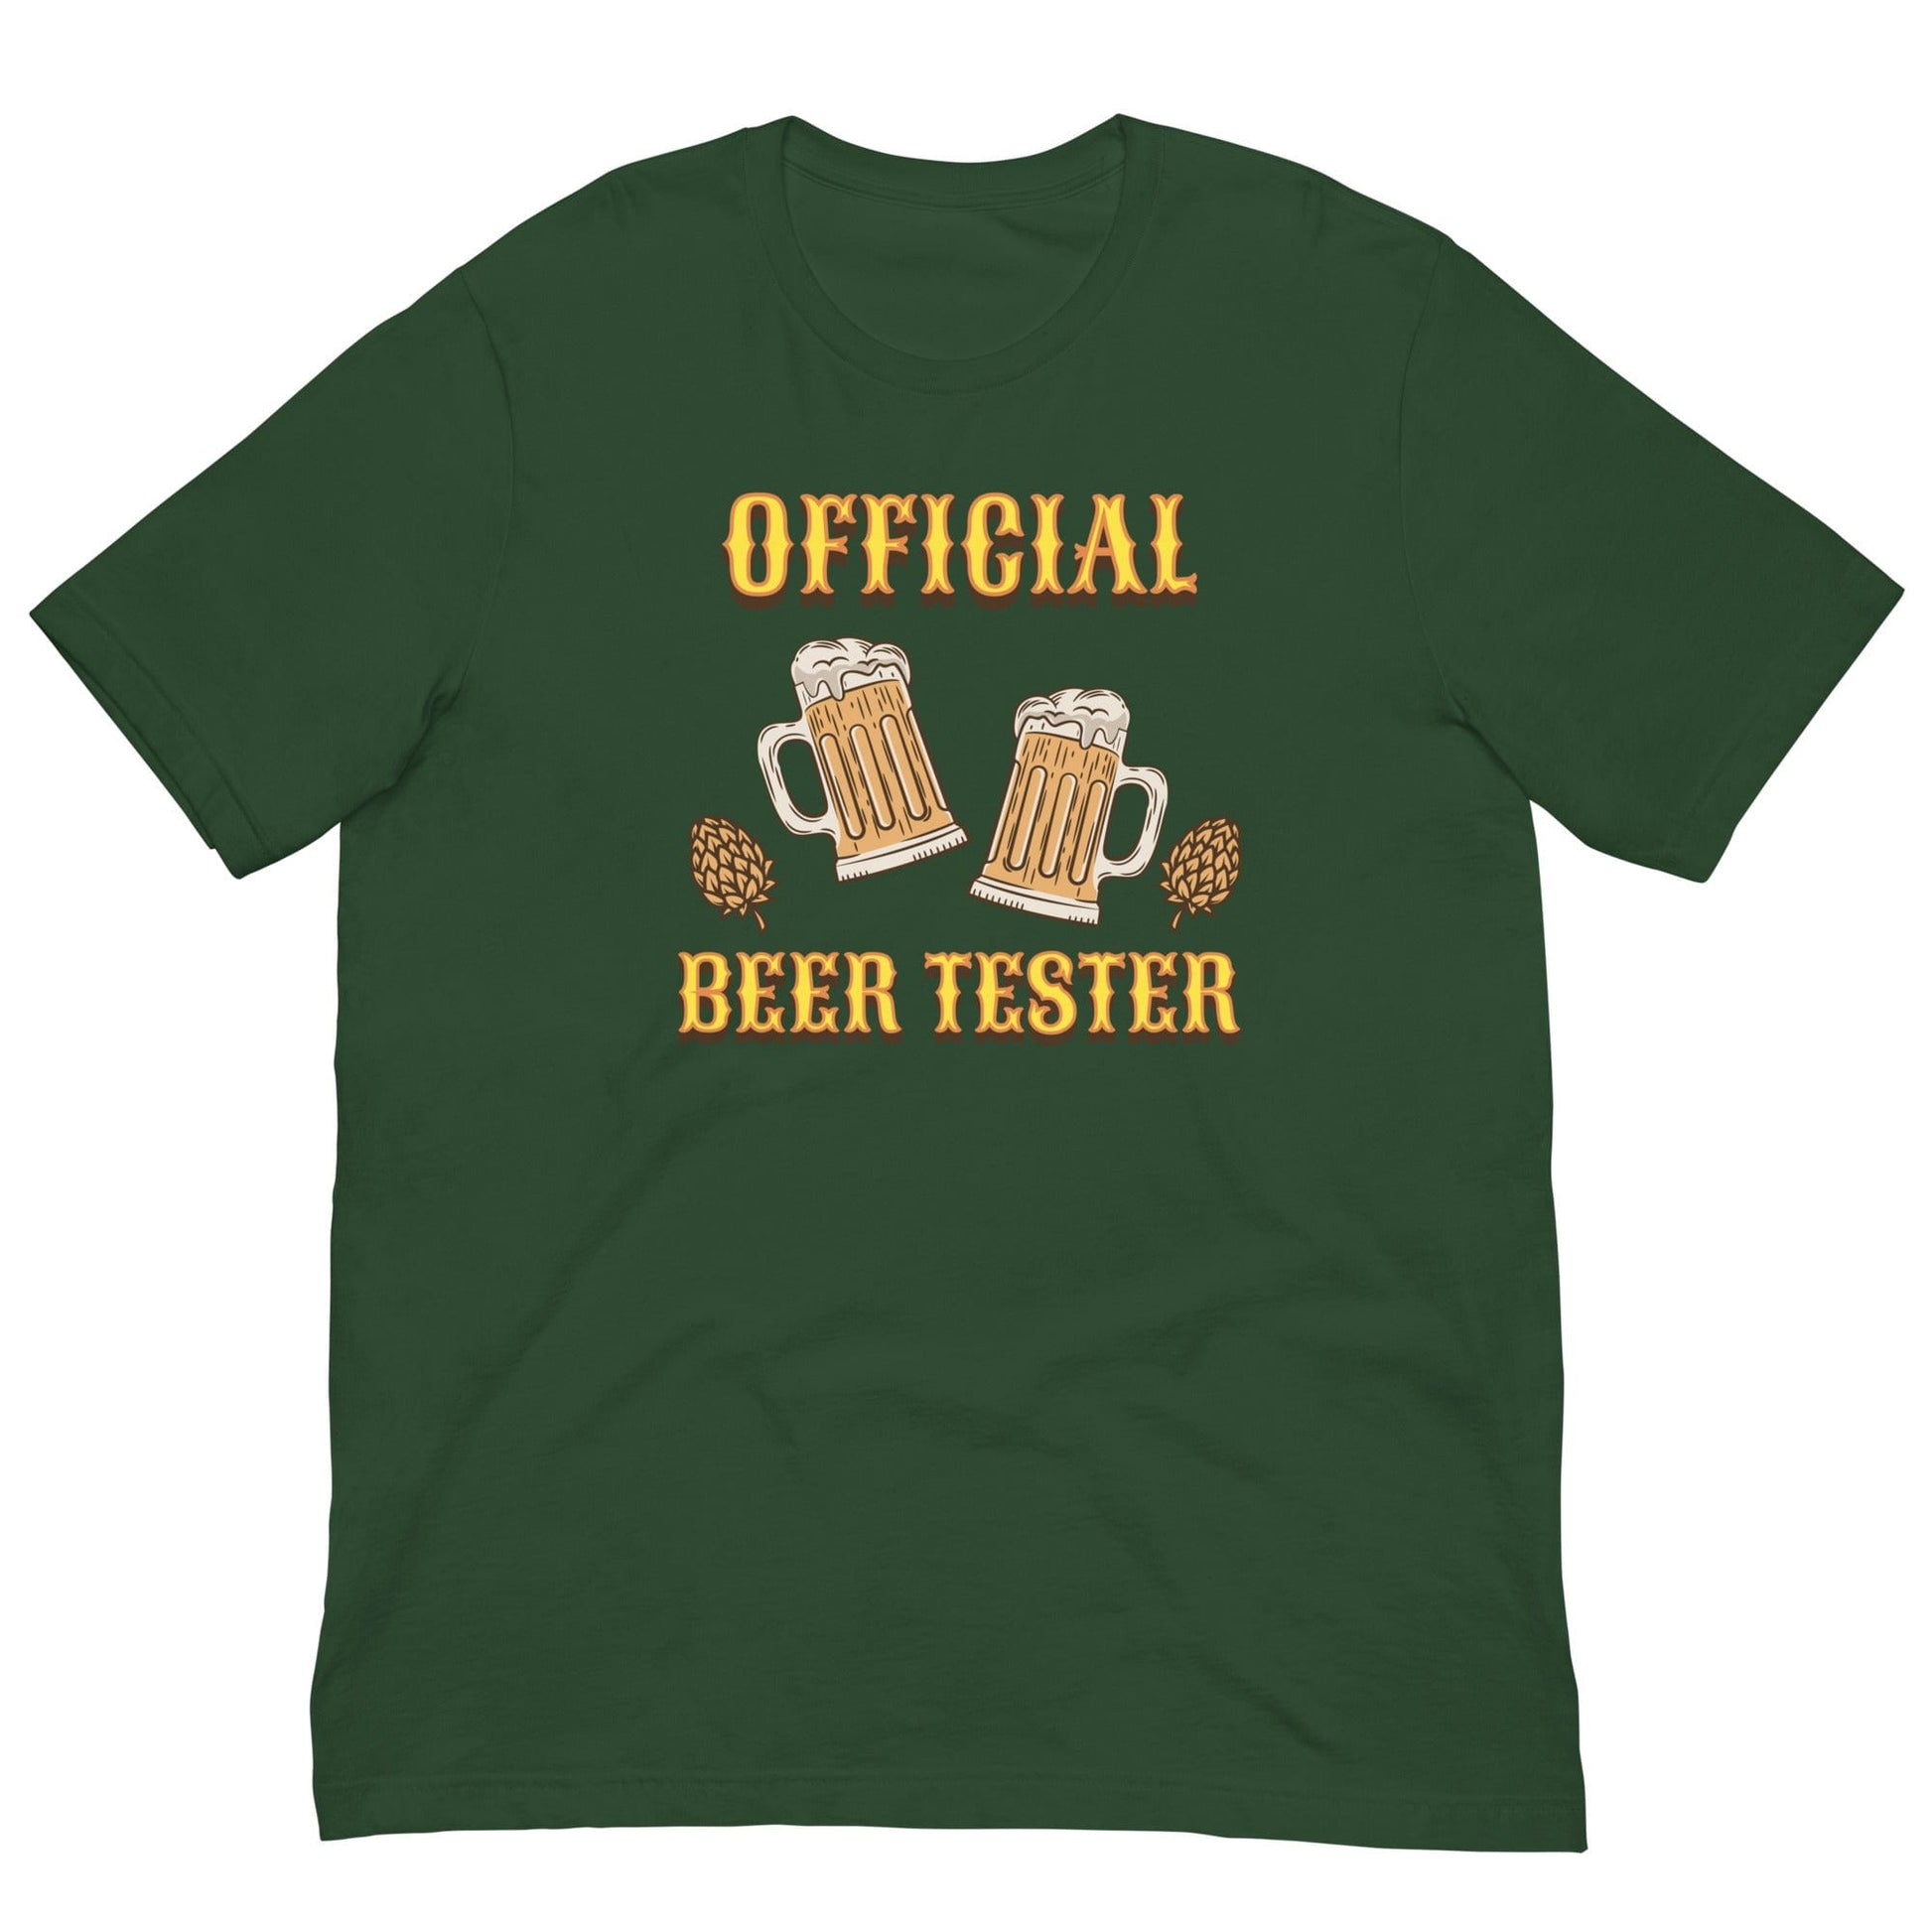 Official Beer tester T-shirt Forest / S